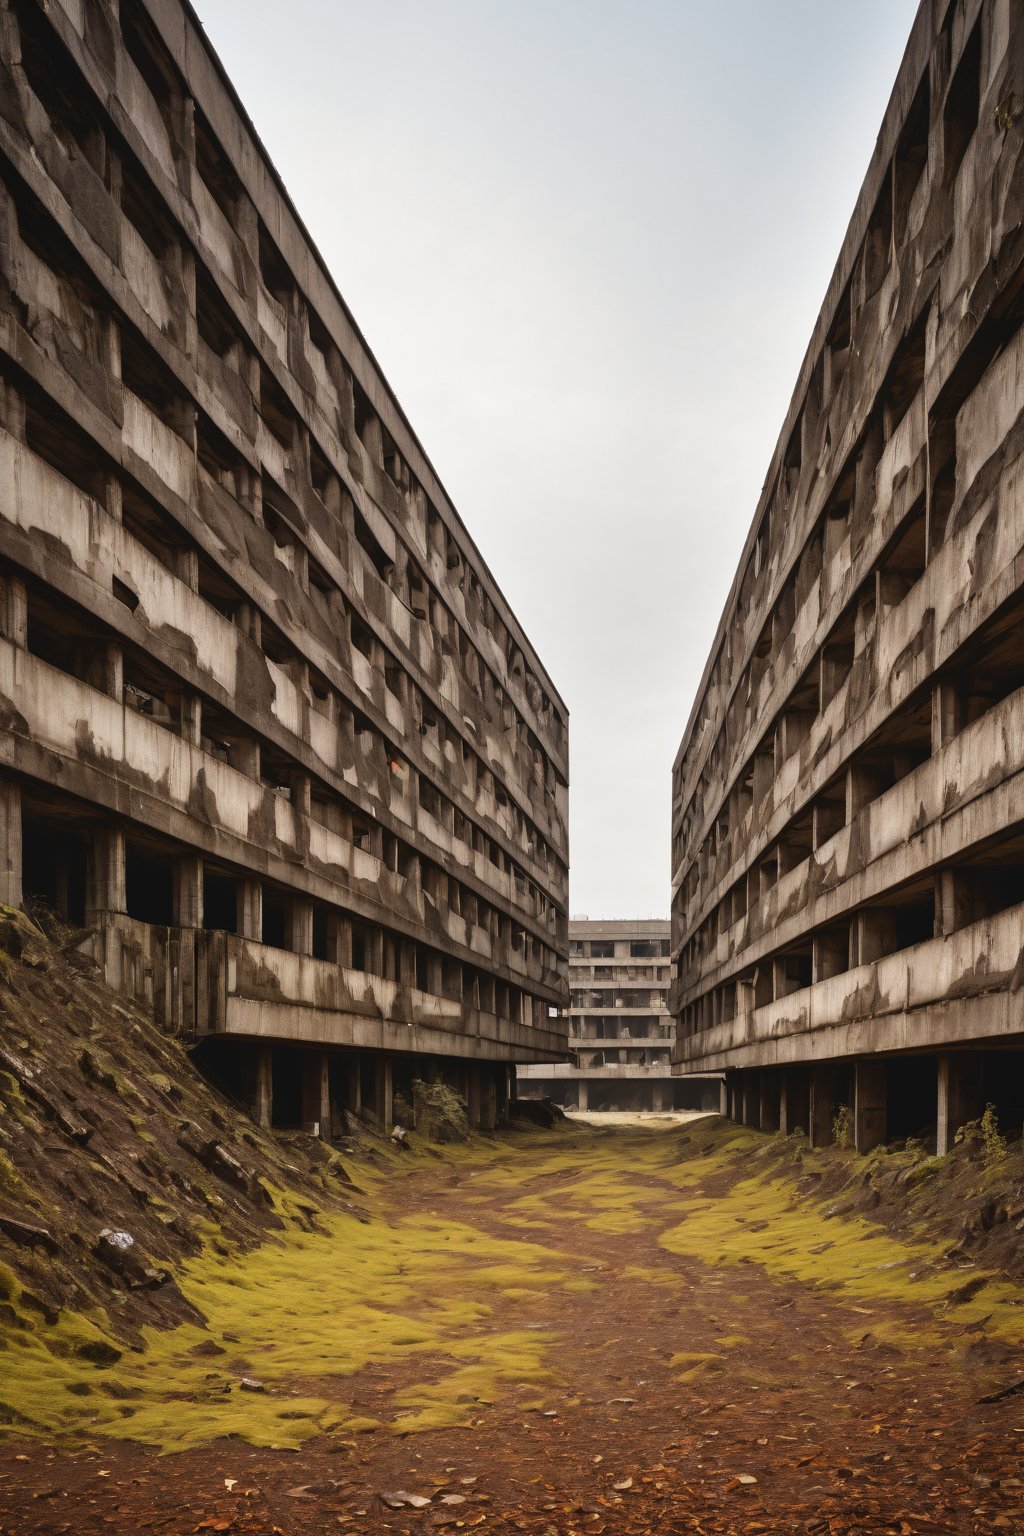 Brutalism Building in desolated environment